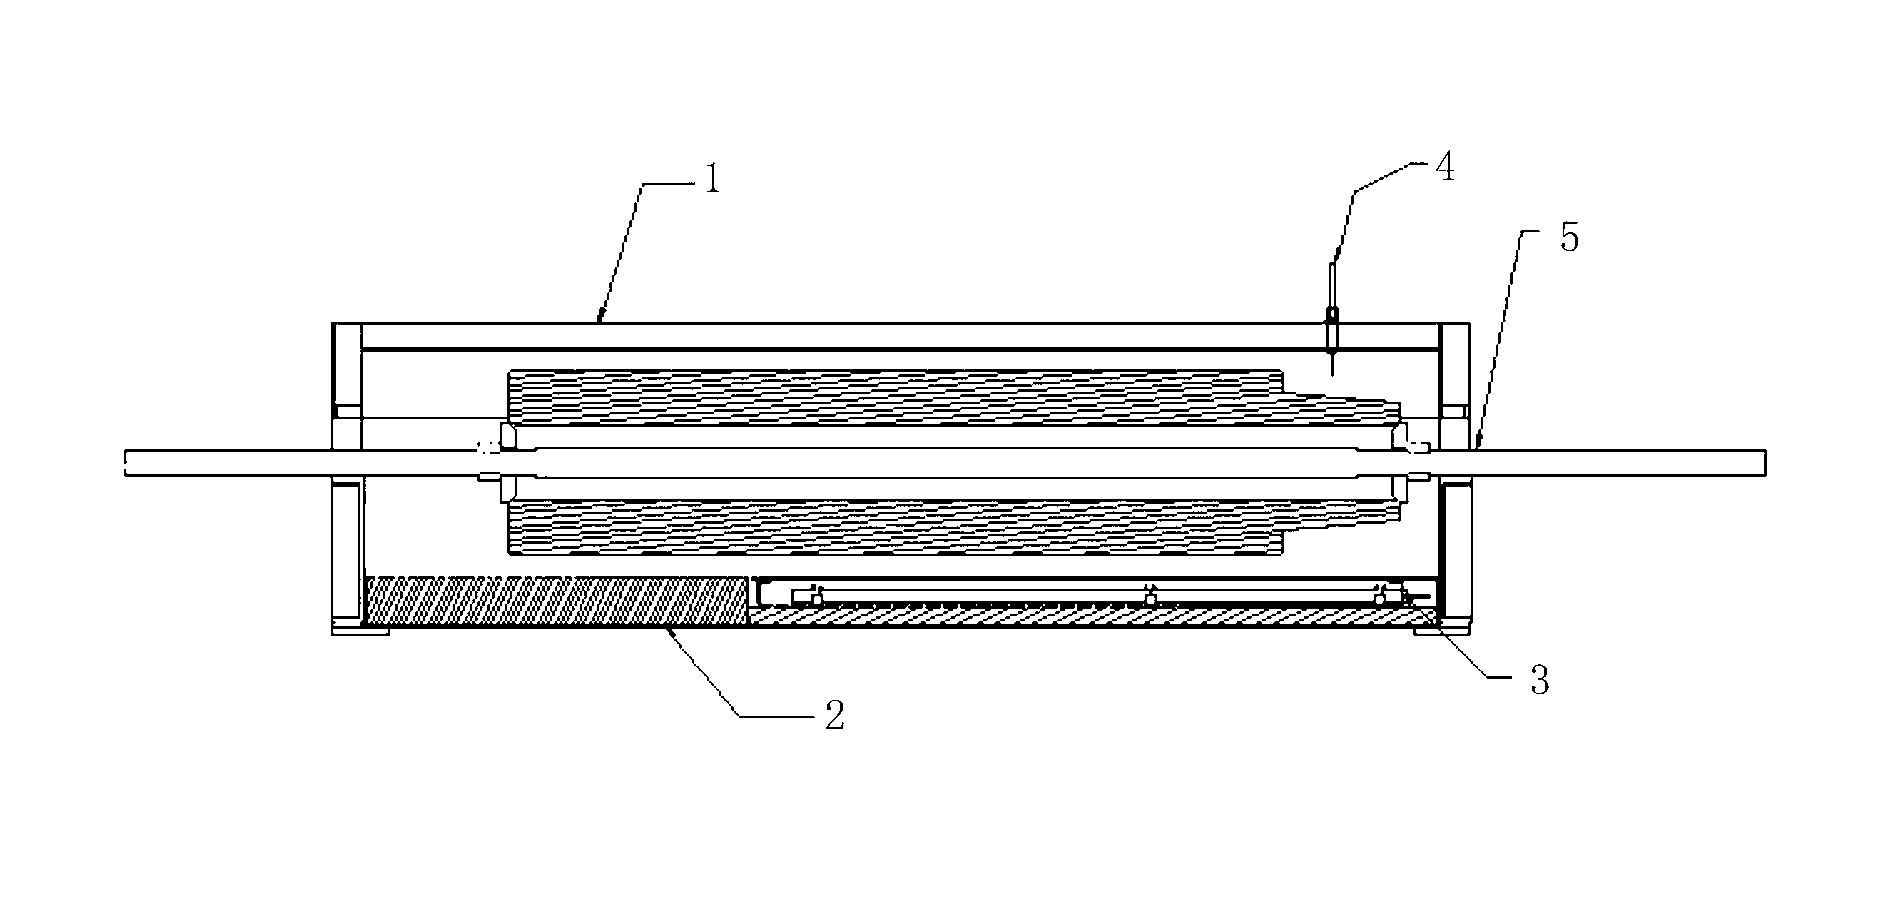 Coating process for electrostatic spraying of polyether-ether-ketone powder on surfaces of drill collar threads